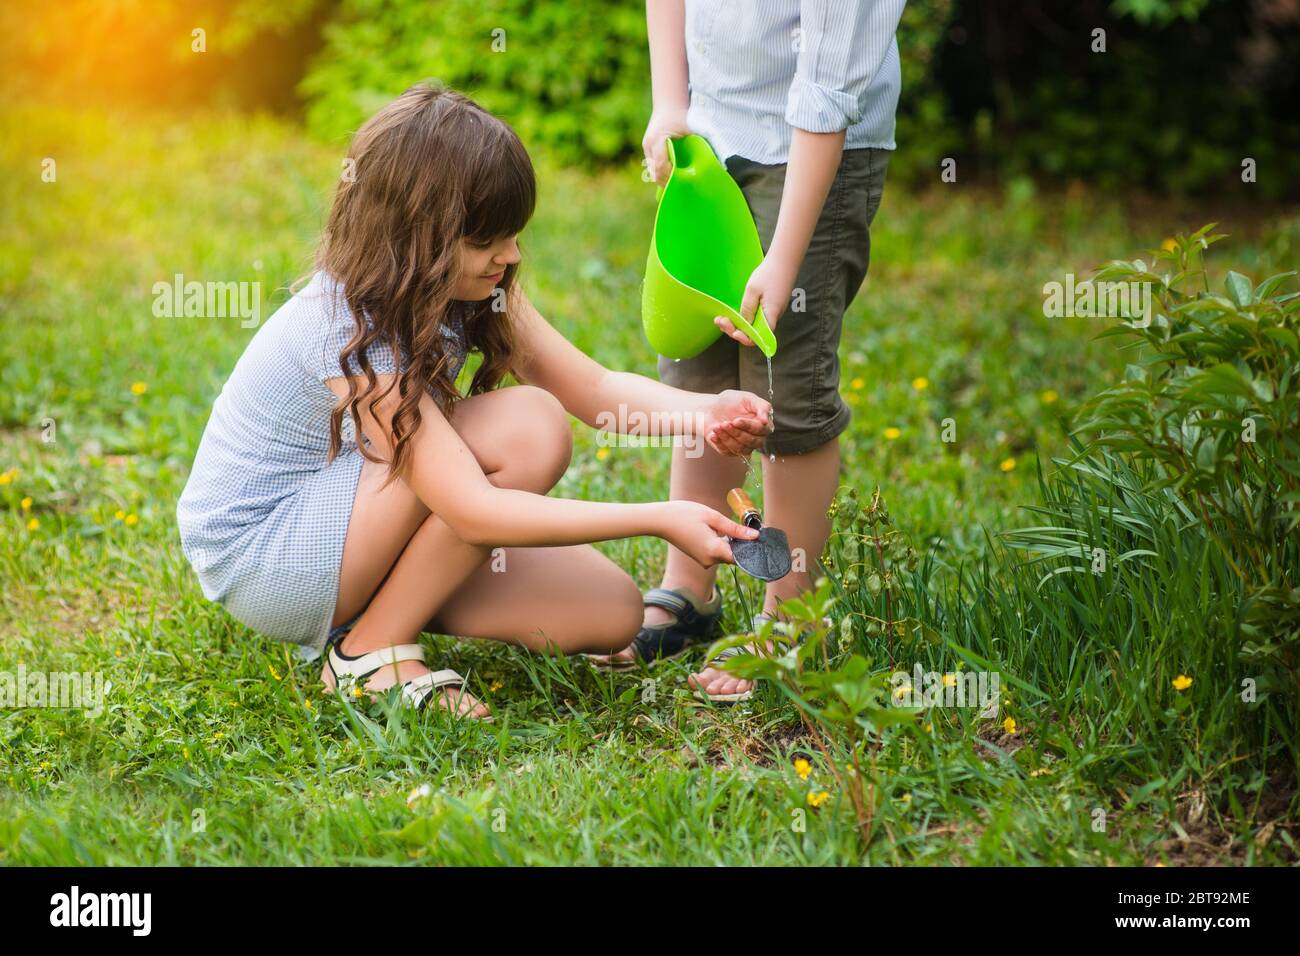 Smiling cute girl and blond boy cleaning horticultura tools in garden on sunny day. Summer activities Stock Photo